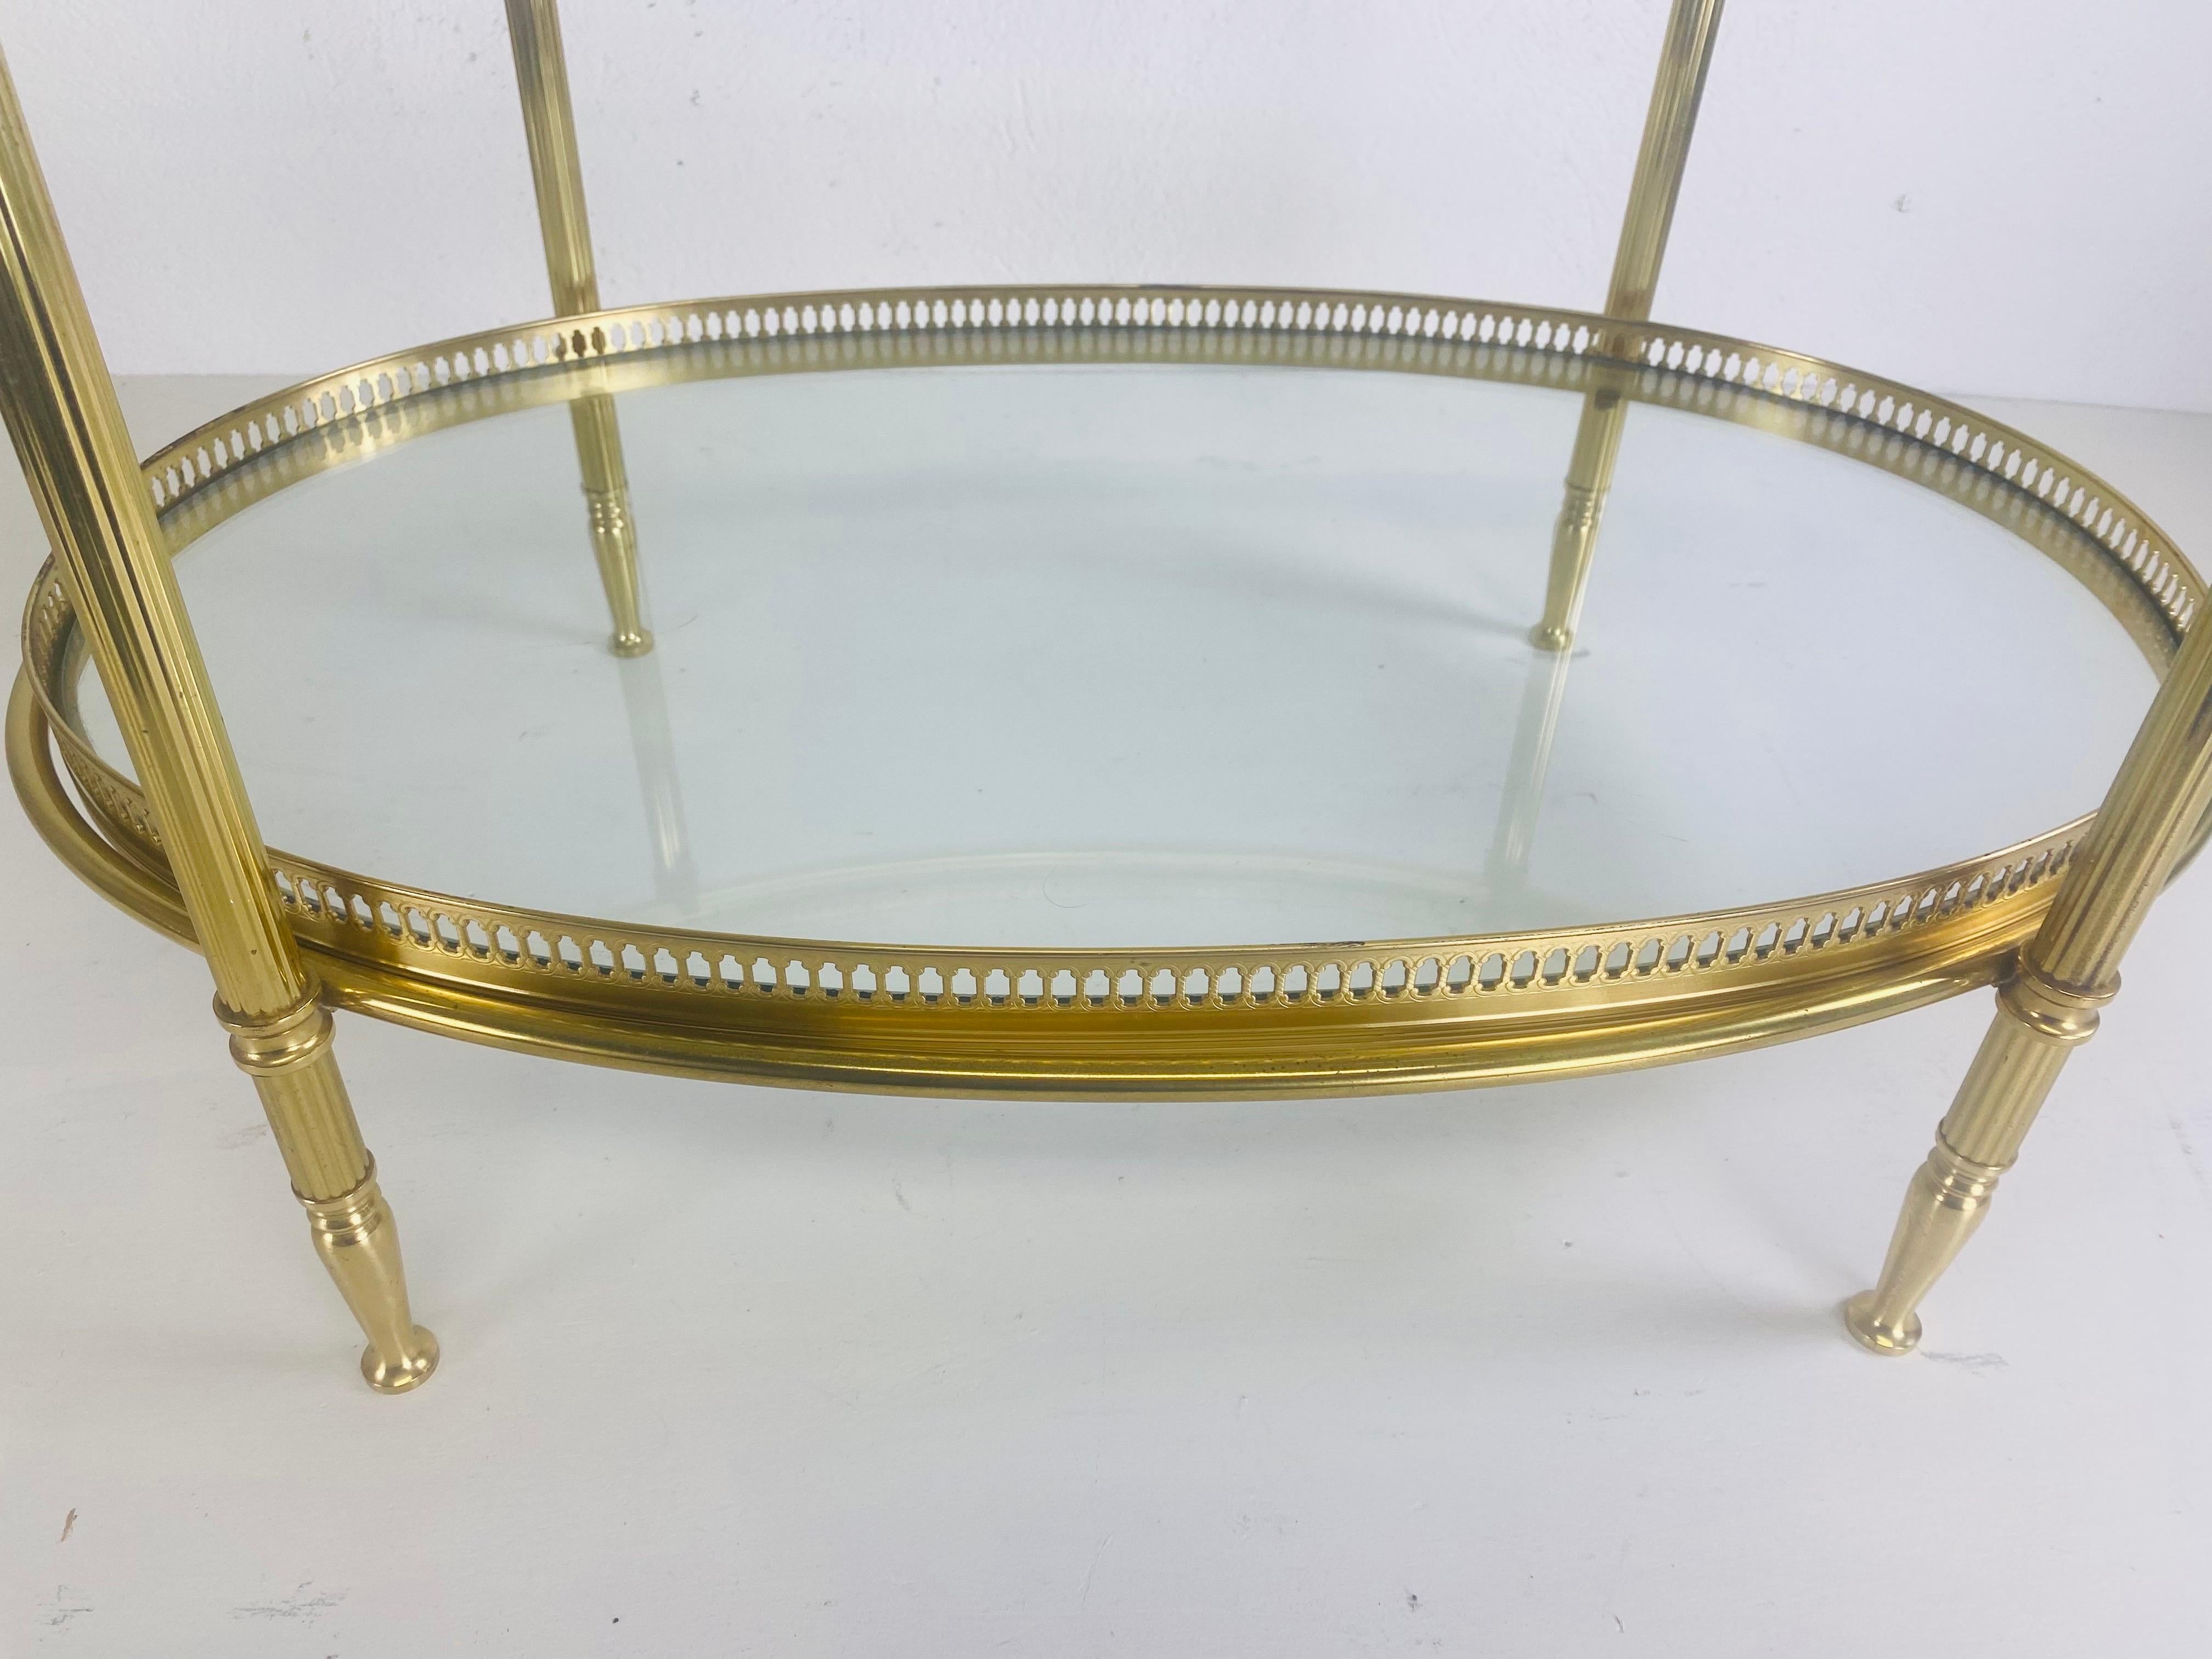 Regency Handsome mid century solid brass Italian tray table after Maison Jansen For Sale